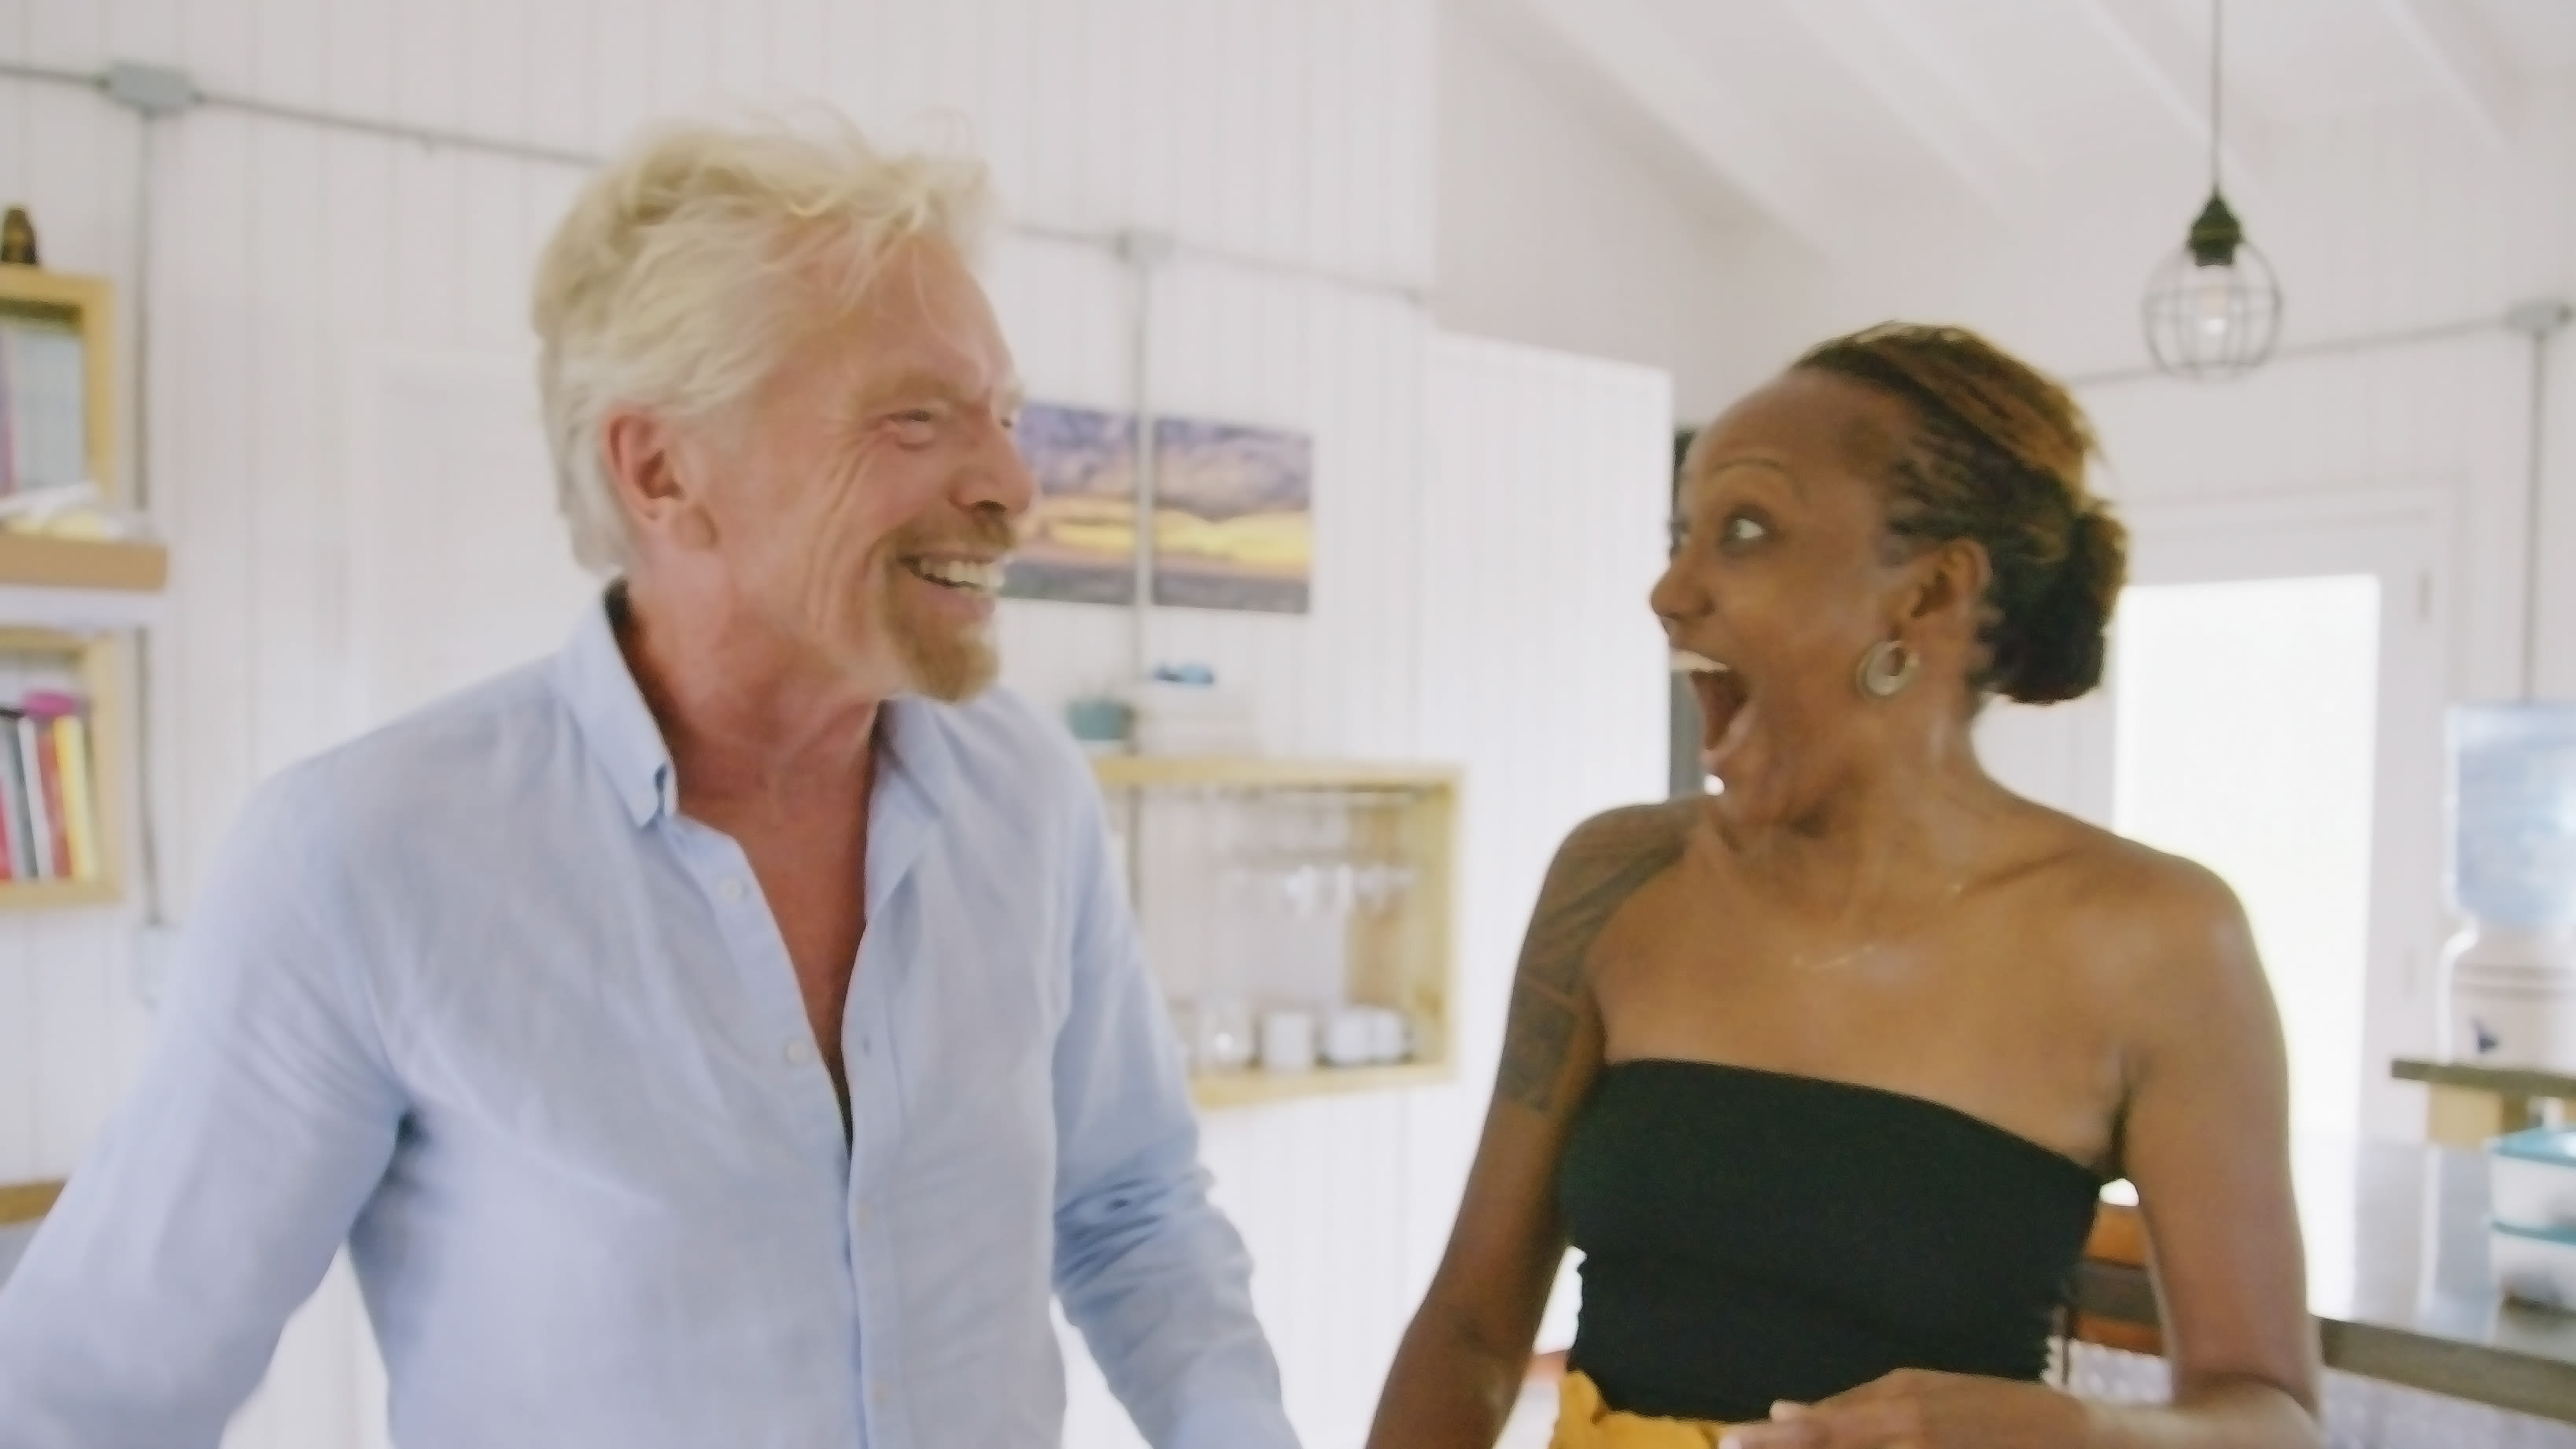 Richard Branson with the Virgin Galactic and Omaze competition winner Keisha Schahaff